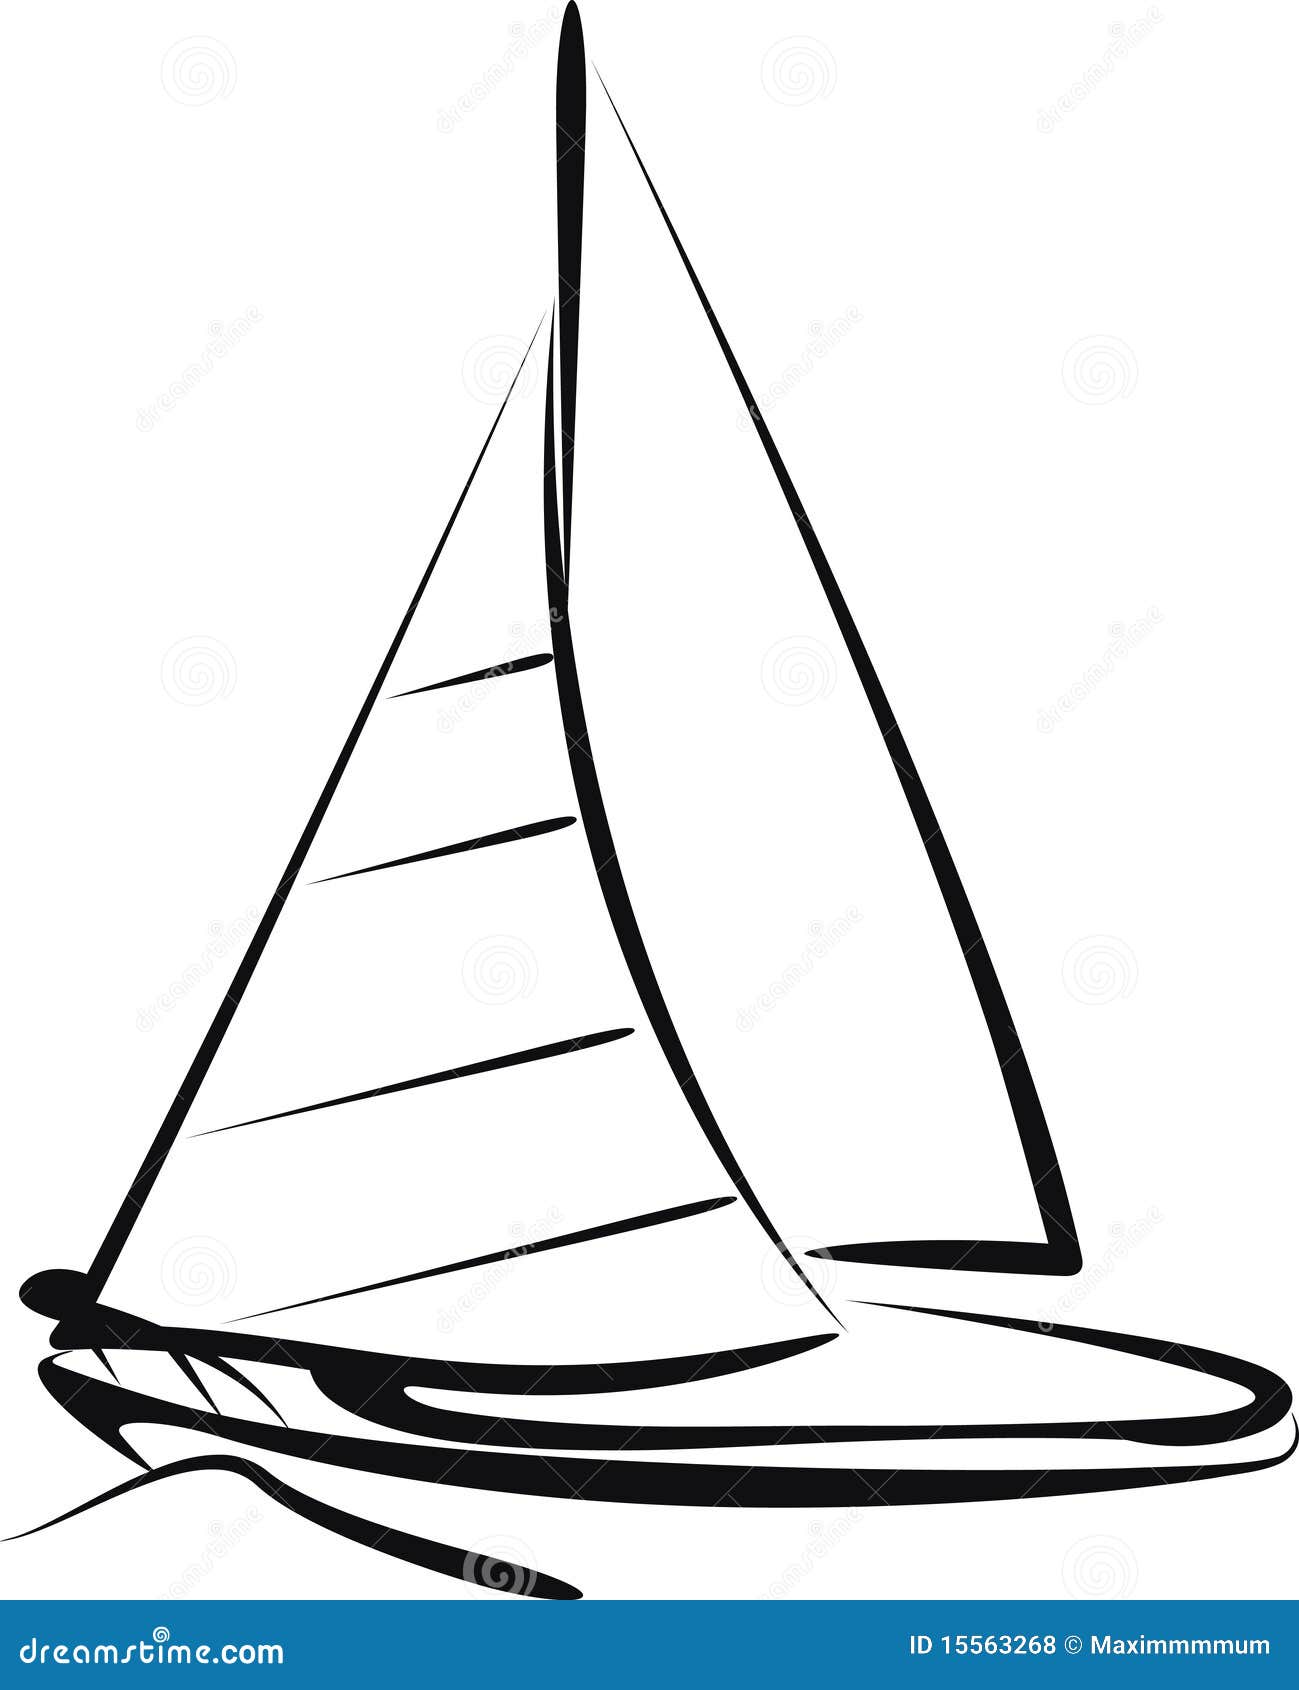 boat outline clipart - photo #31